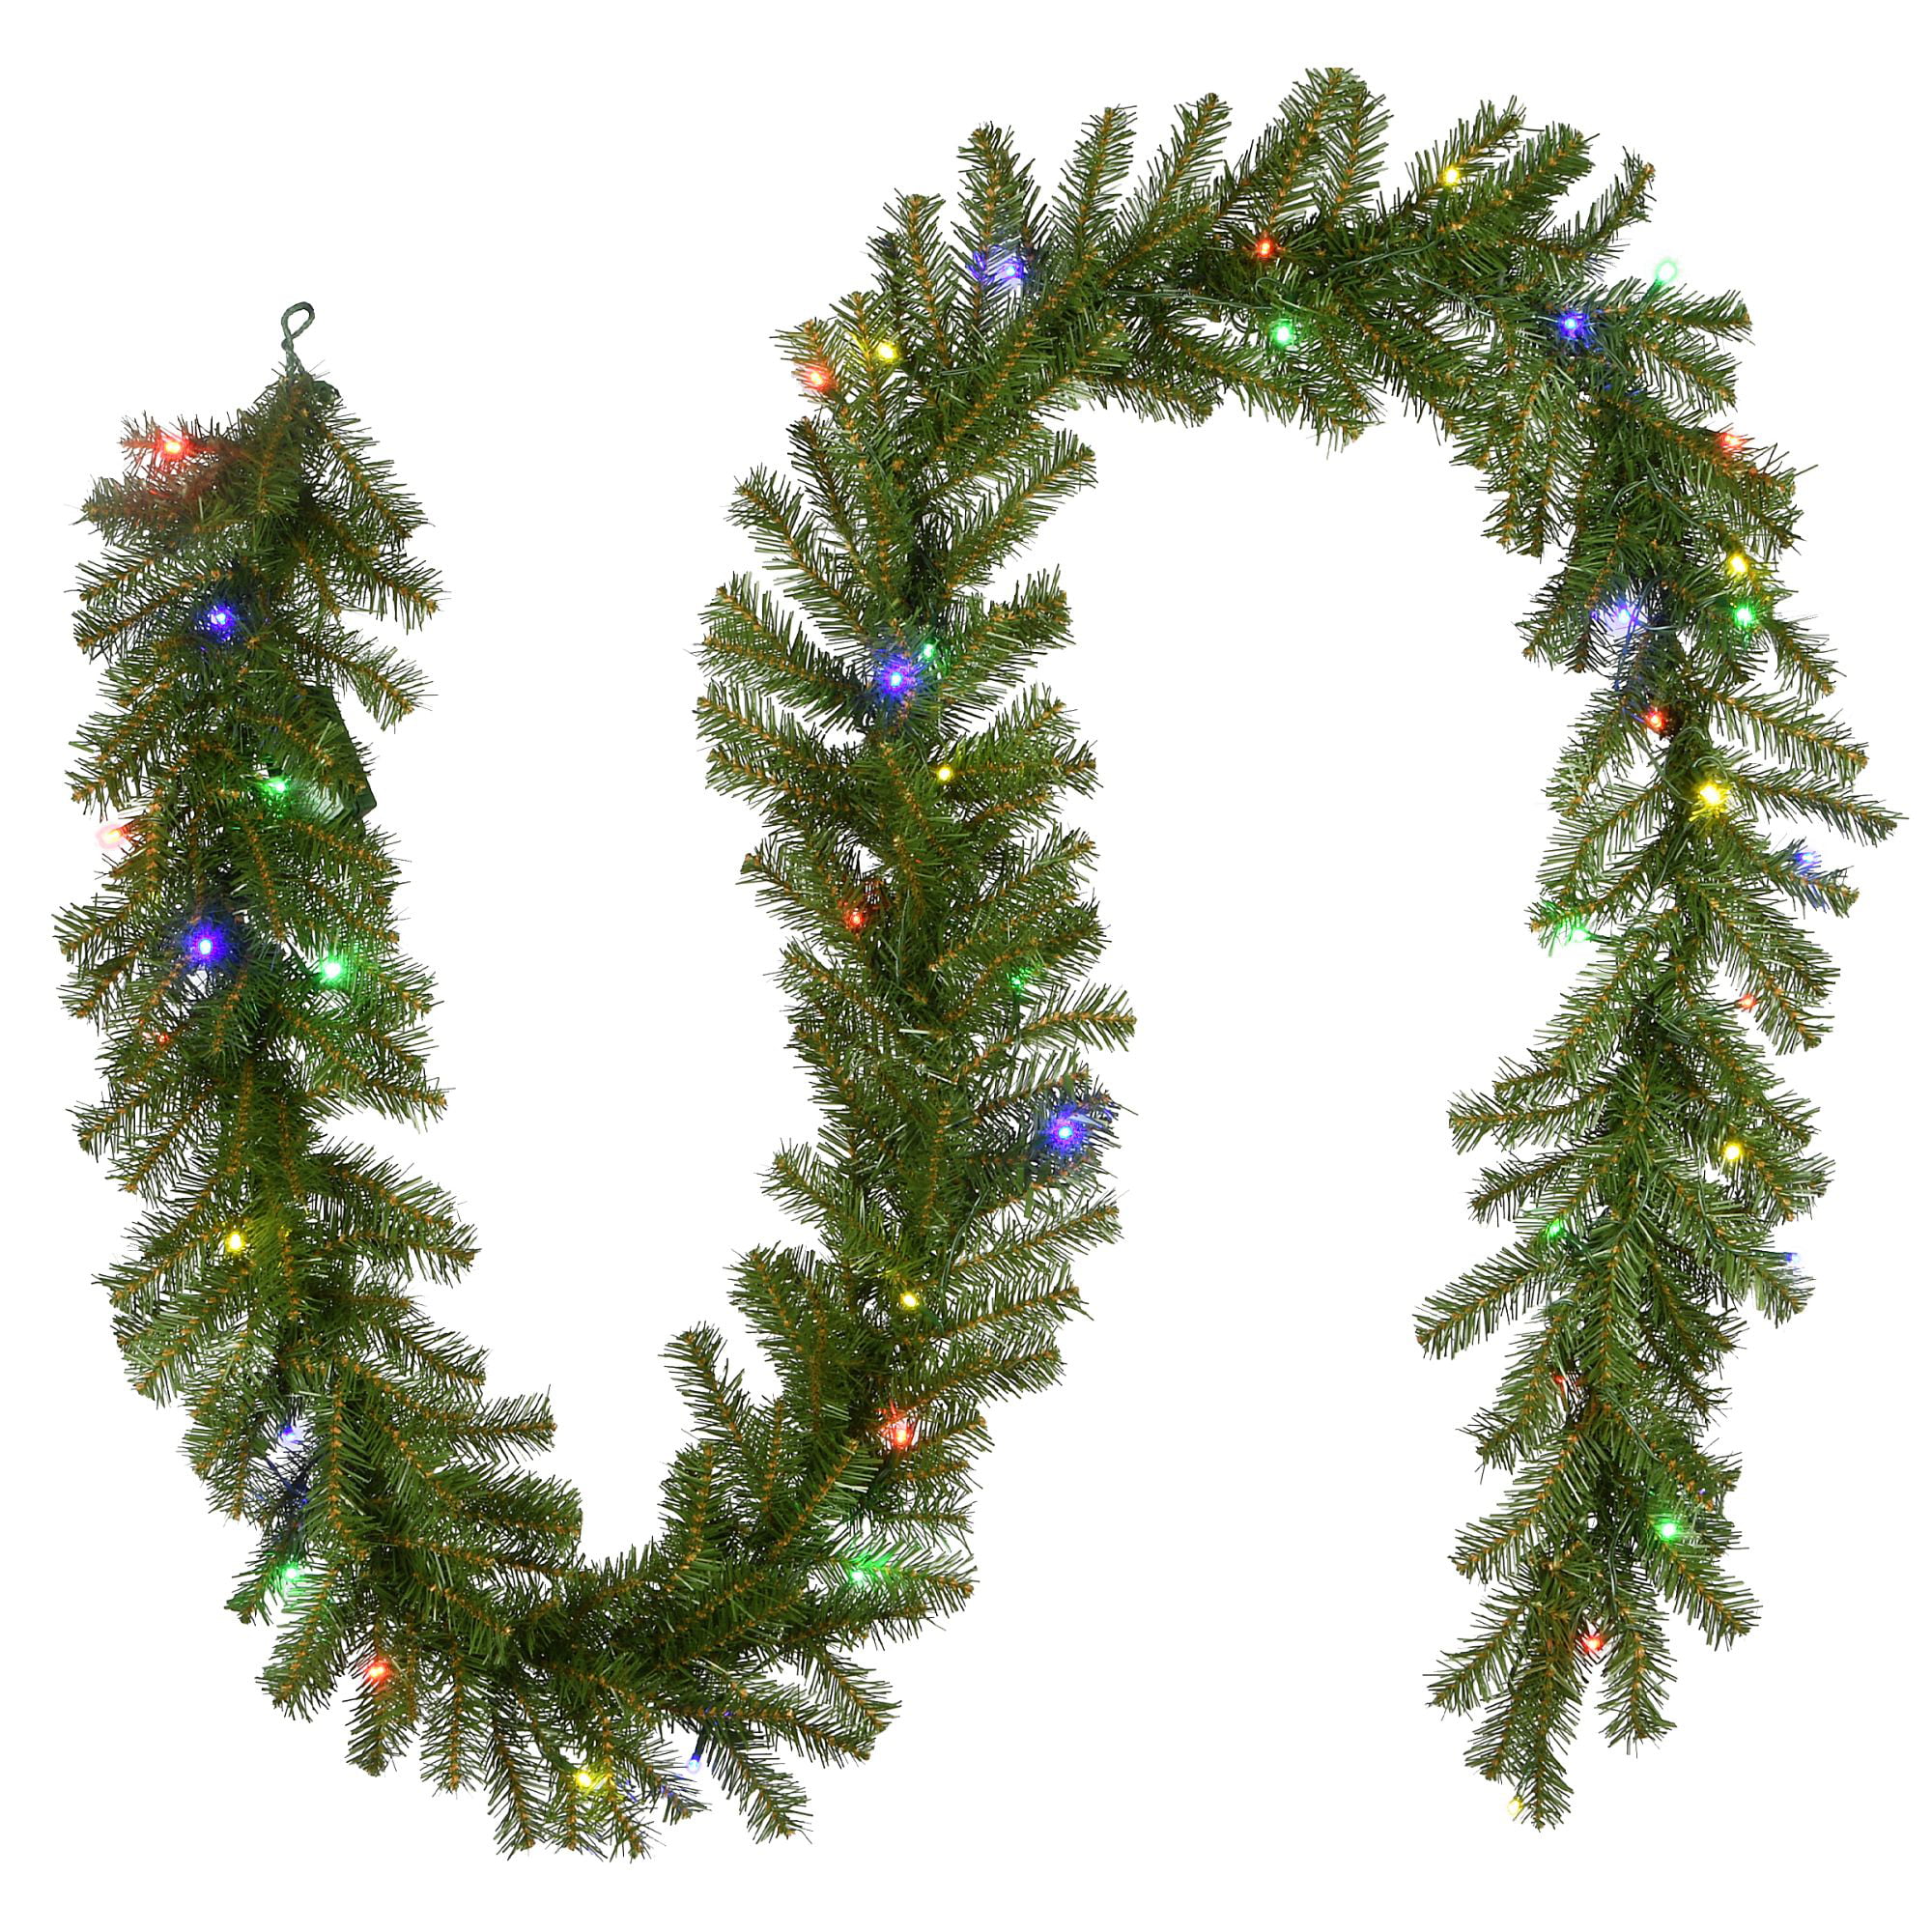 Details about   4 Lot 9' x 12" Norwood Fir Garland with 100 Clear Lights Green 